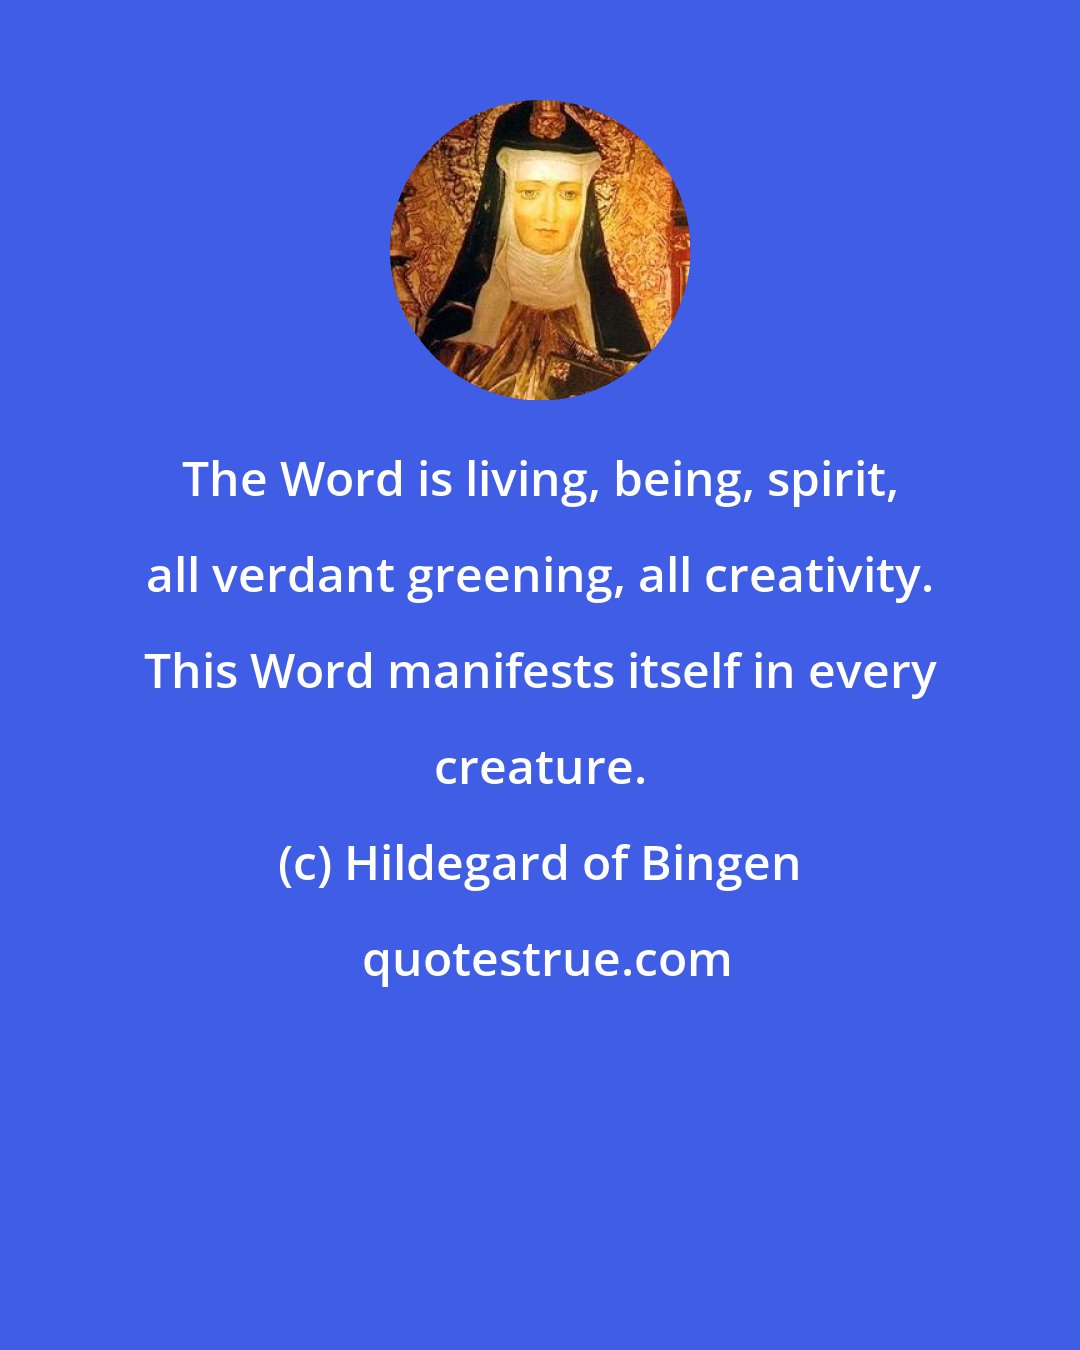 Hildegard of Bingen: The Word is living, being, spirit, all verdant greening, all creativity. This Word manifests itself in every creature.